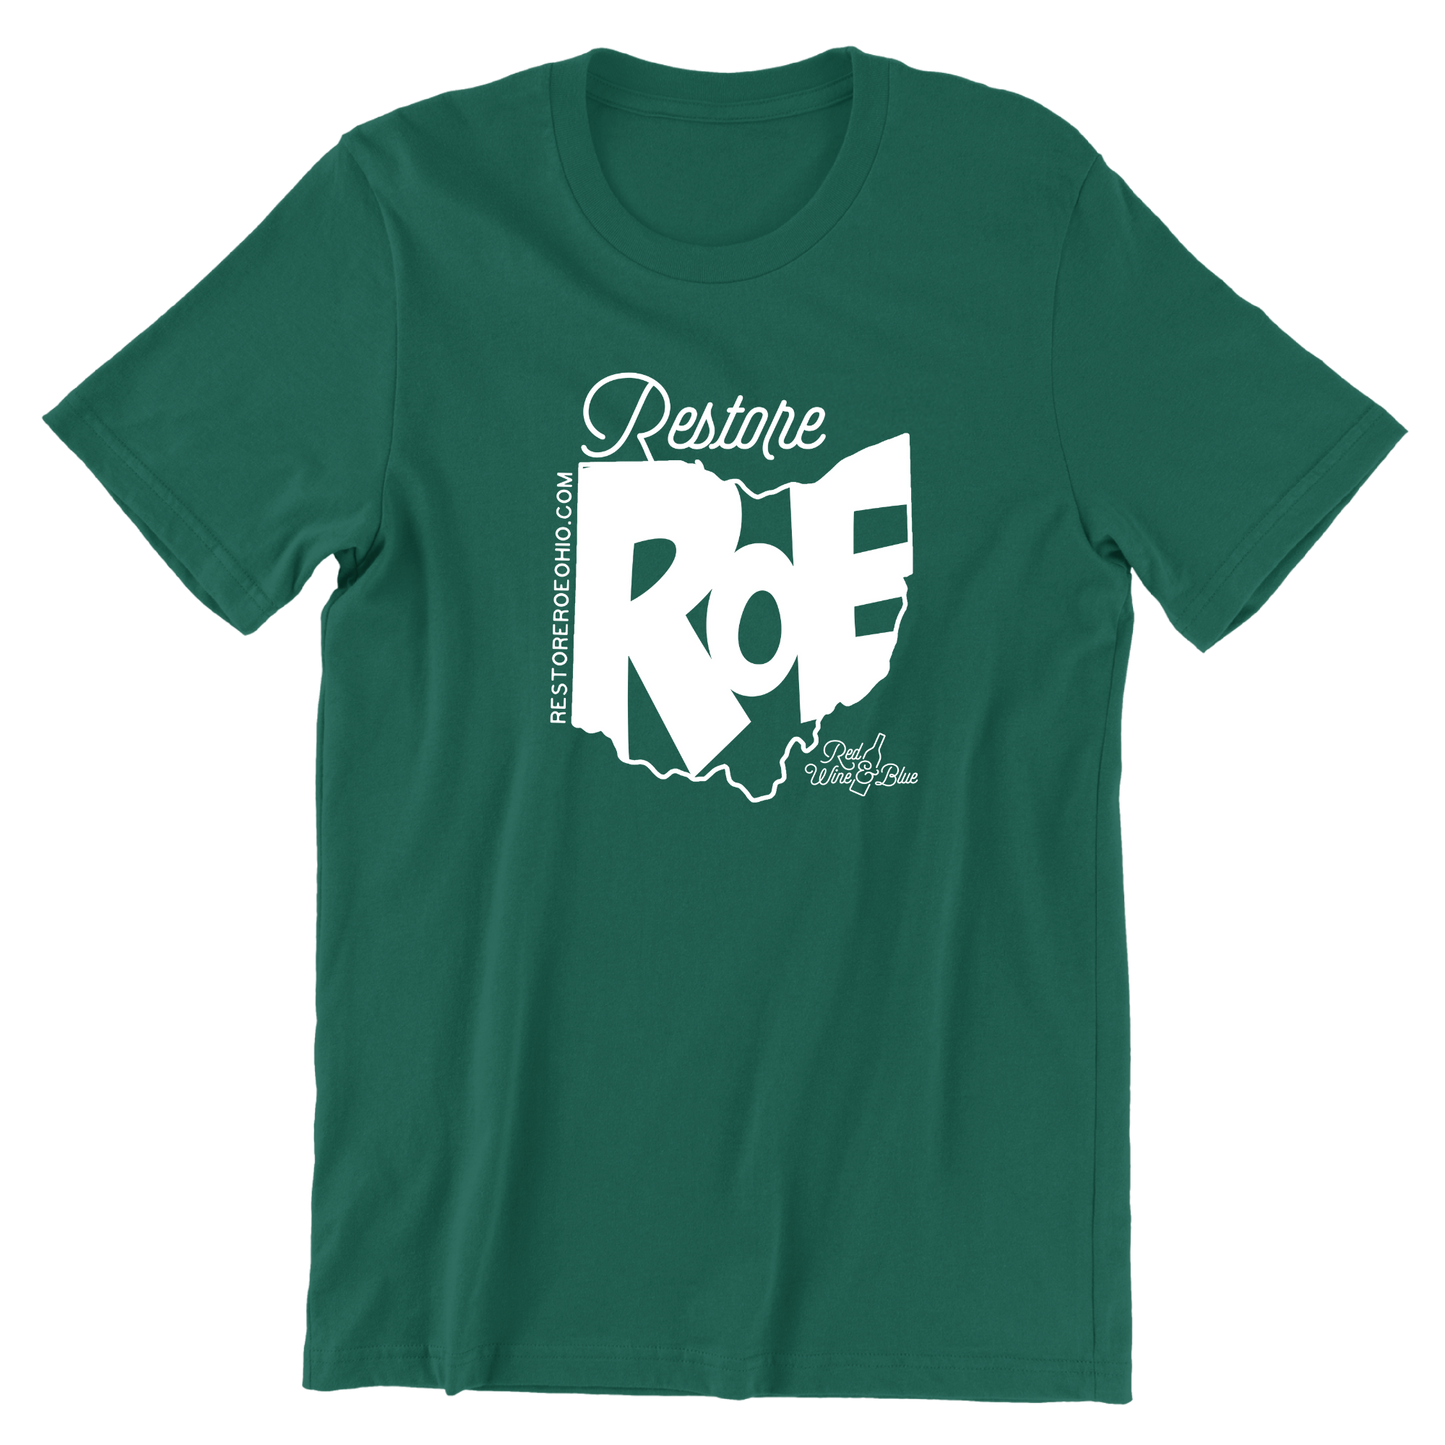 Restore Roe T-shirt – Red Wine and Blue